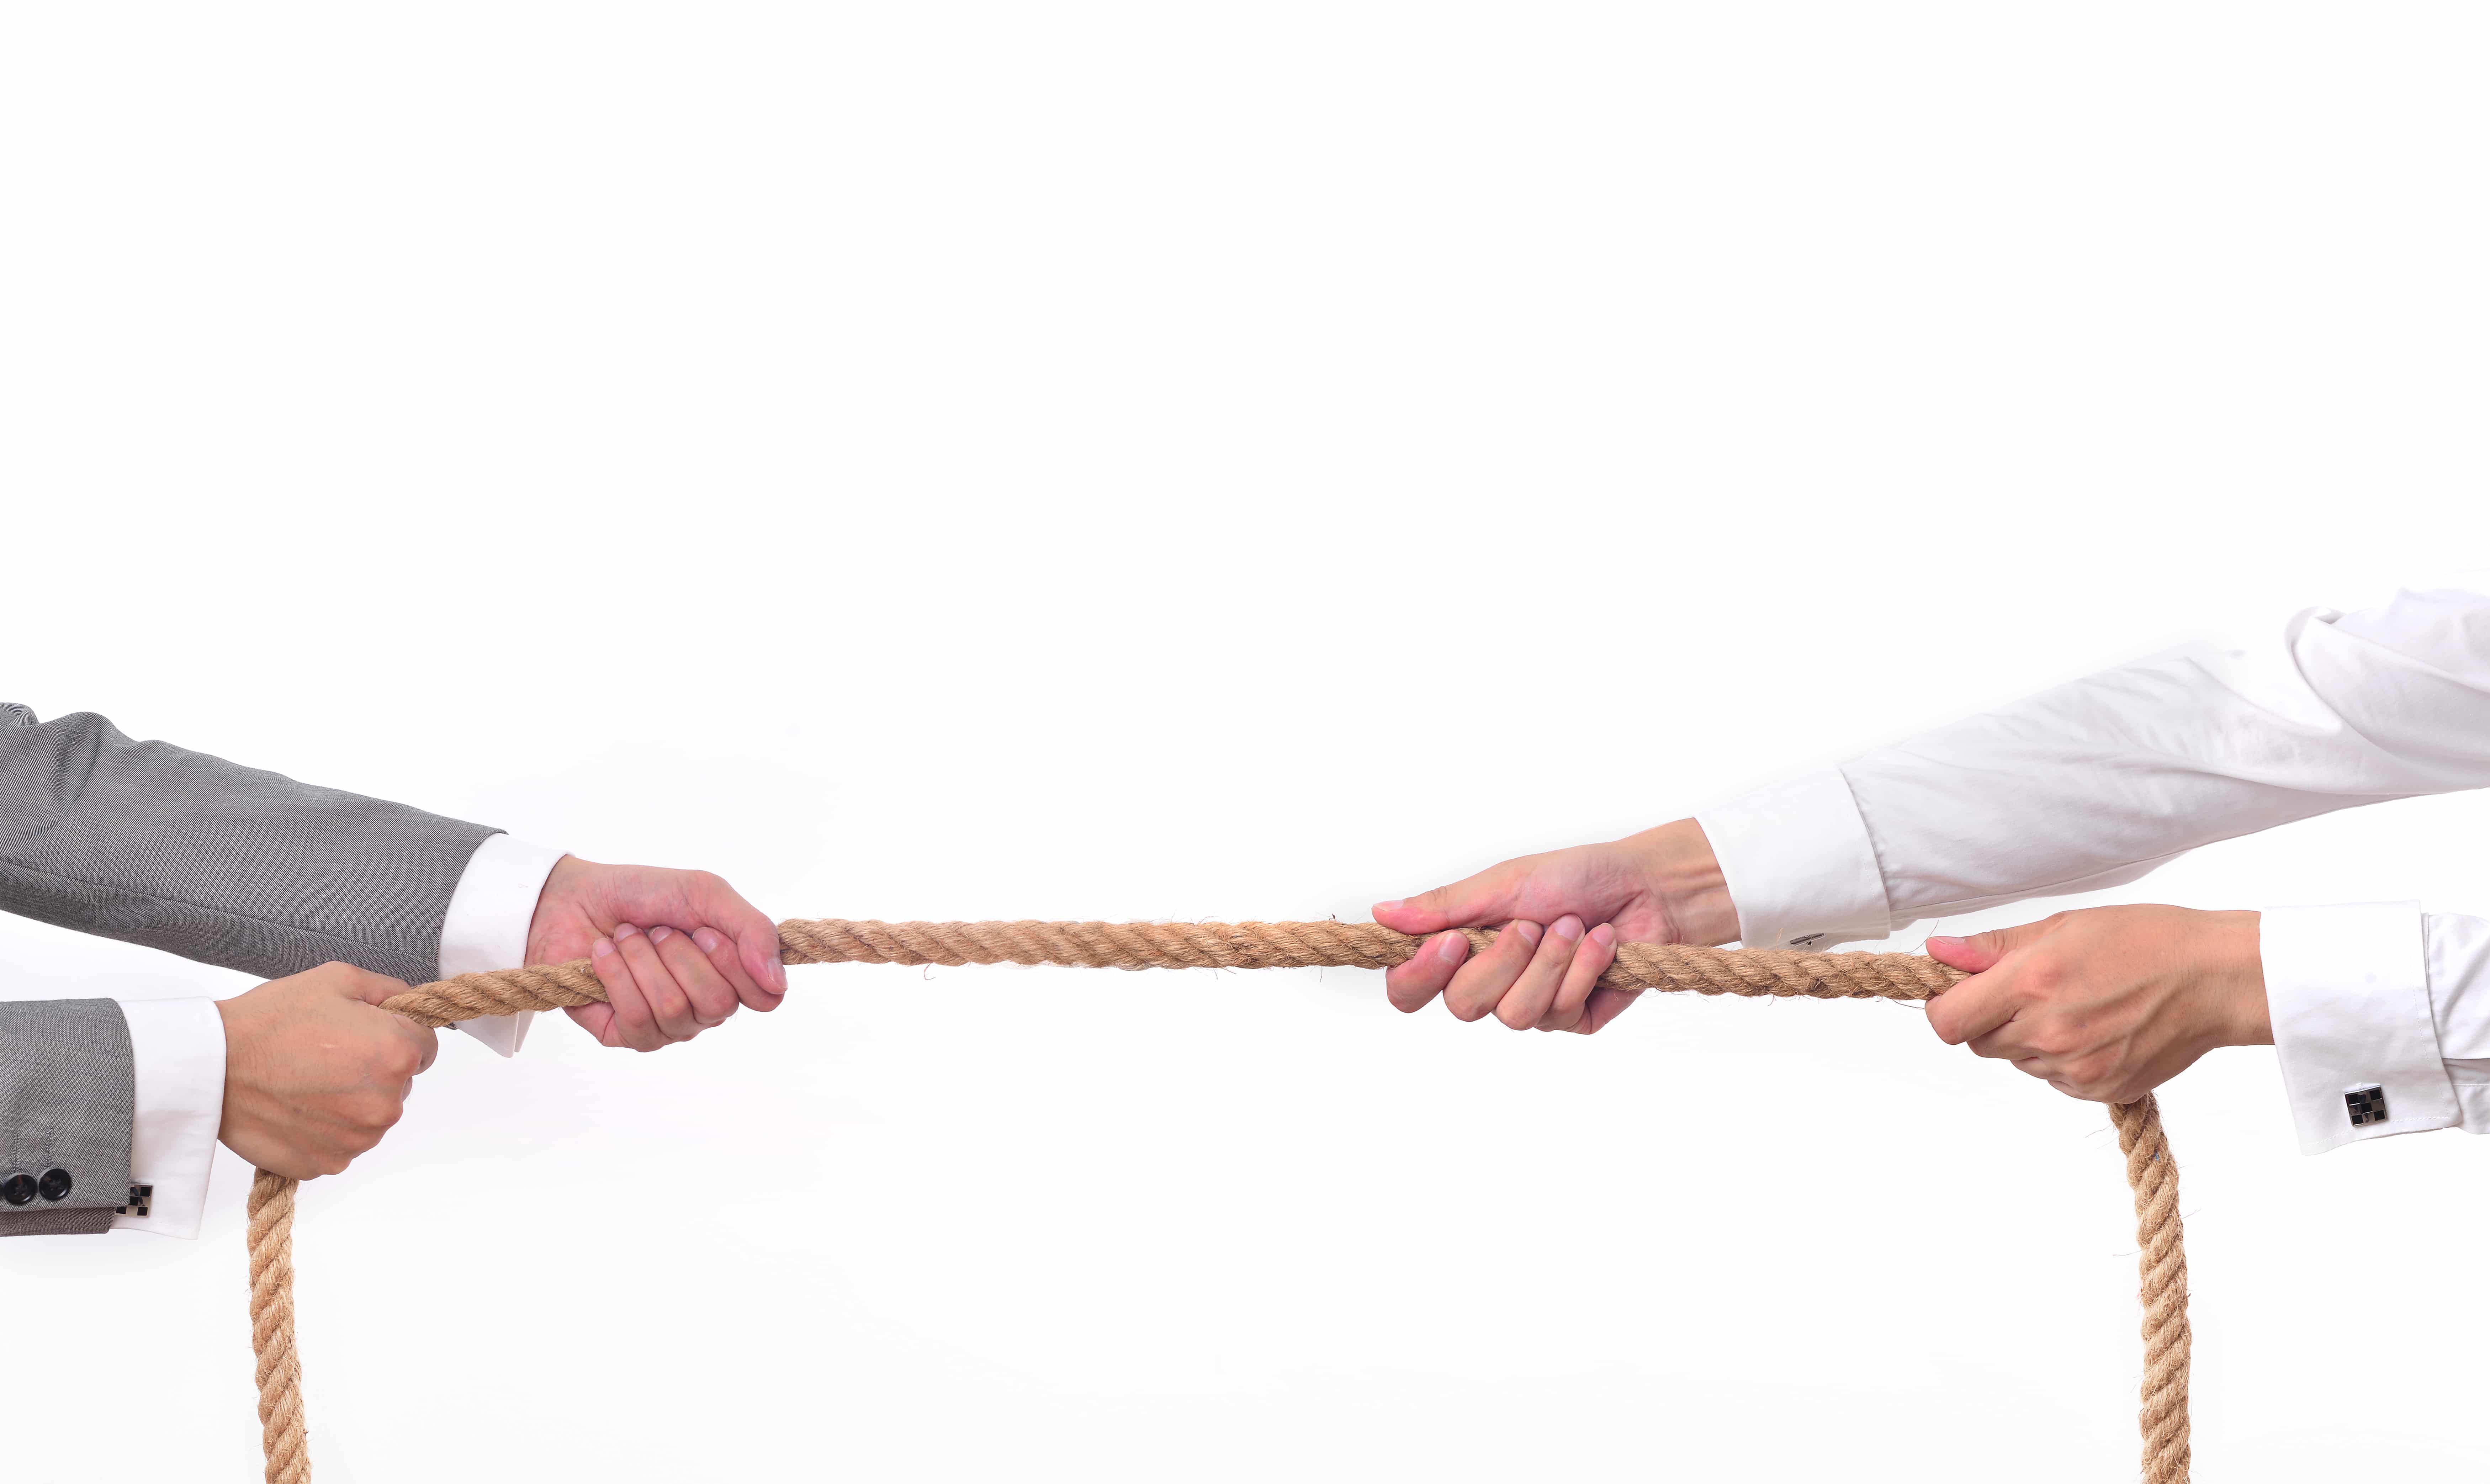 Tug war, two businessman pulling a rope in opposite directions isolated on white background